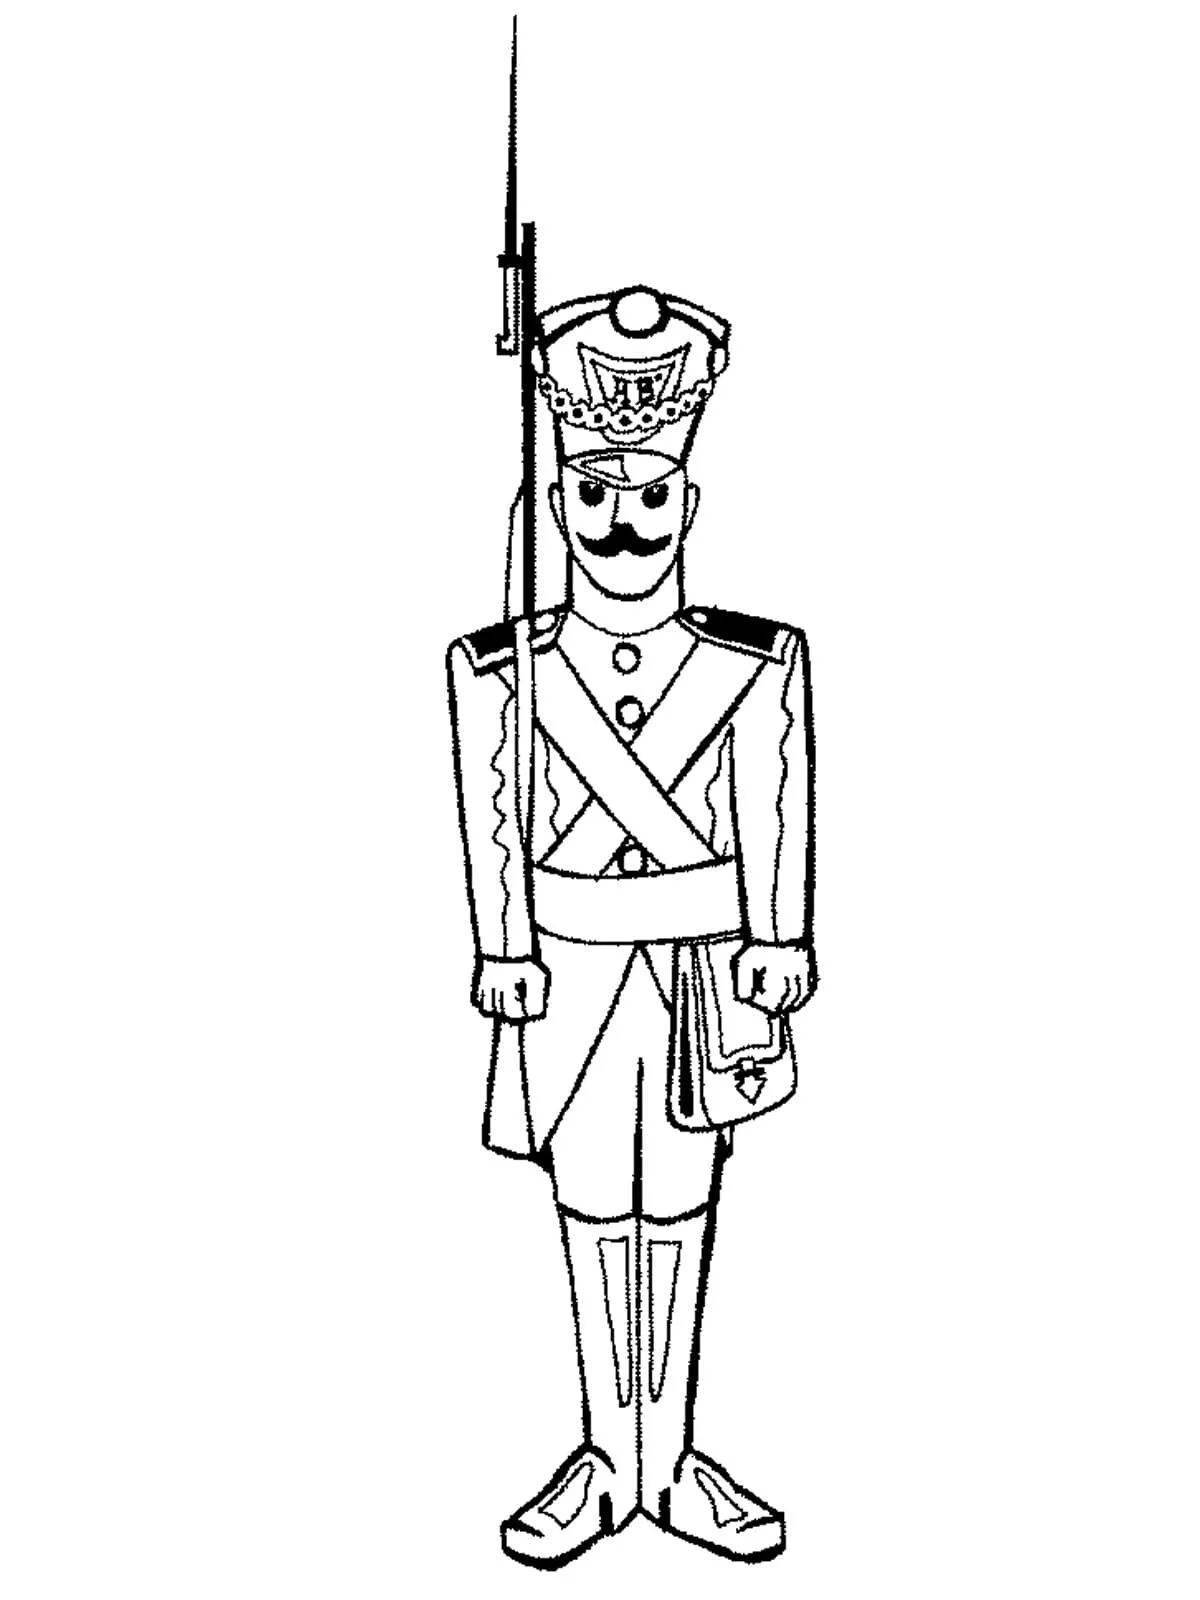 Strong Tin Soldier superb coloring page